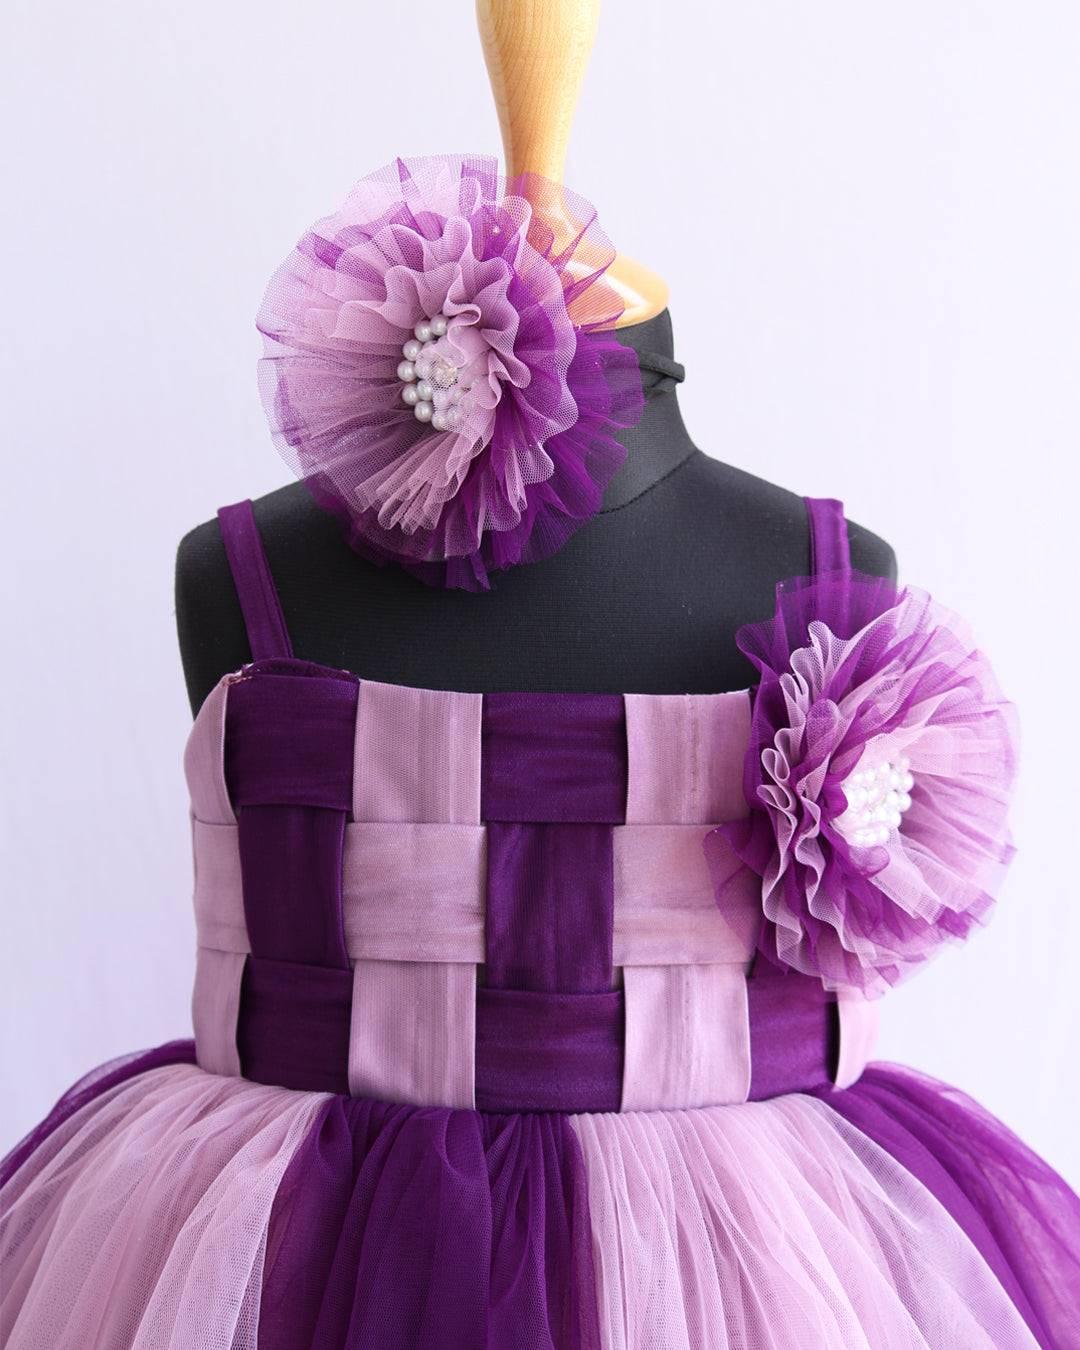 Purple & Pastel Pink Double Shade Layered Frock
Material: Purple and Pastel pink nylon net is used as in the skirt and yoke part of the dress. In the yoke portion two colours are given in a weaving pattern for an